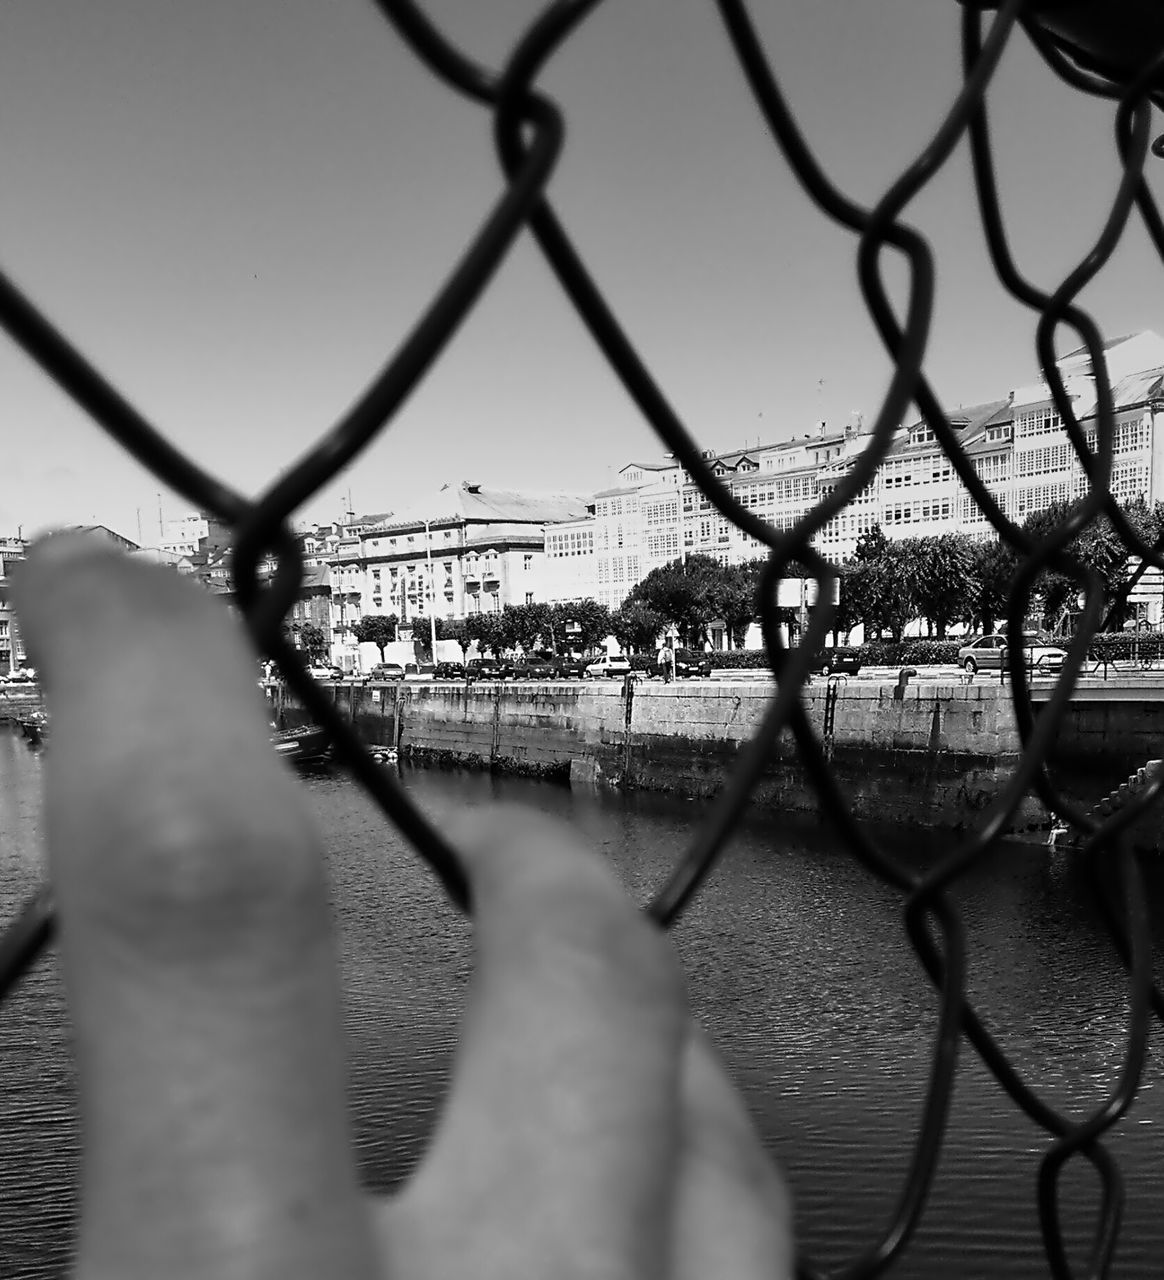 water, metal, river, clear sky, chainlink fence, reflection, focus on foreground, fence, railing, close-up, outdoors, nature, transportation, connection, protection, waterfront, bridge - man made structure, day, no people, branch